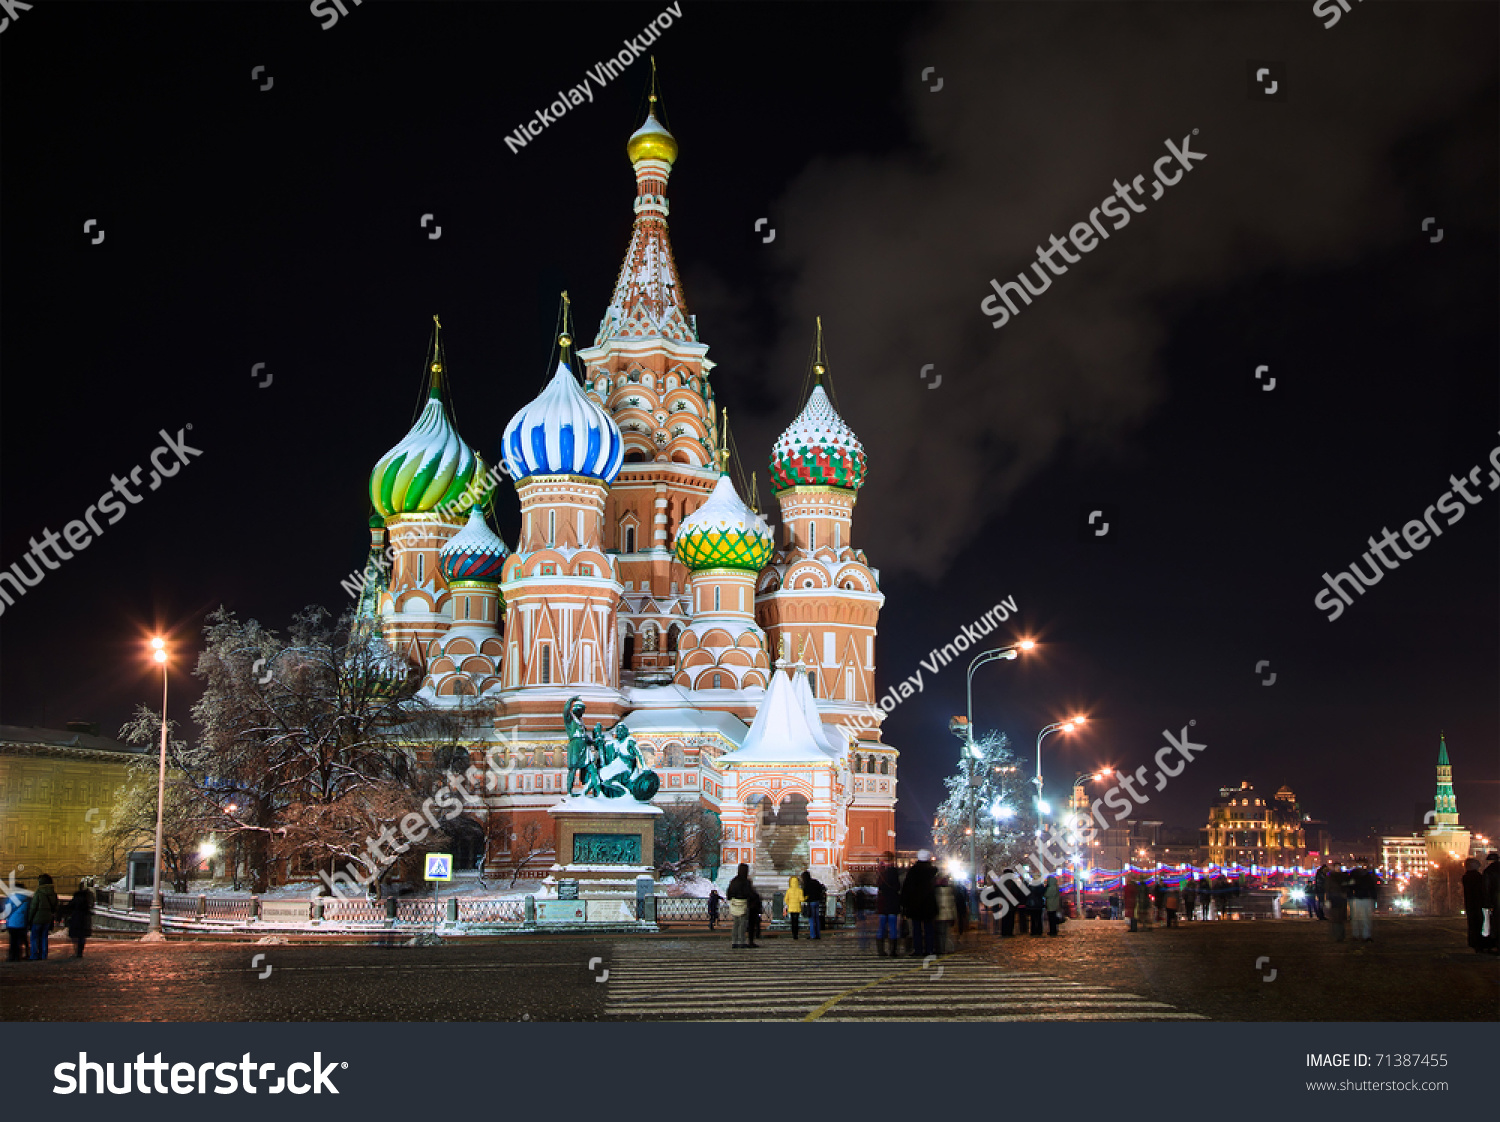 Winter view of Saint Basil's Cathedral at night, Red Square, Moscow, Russia #71387455